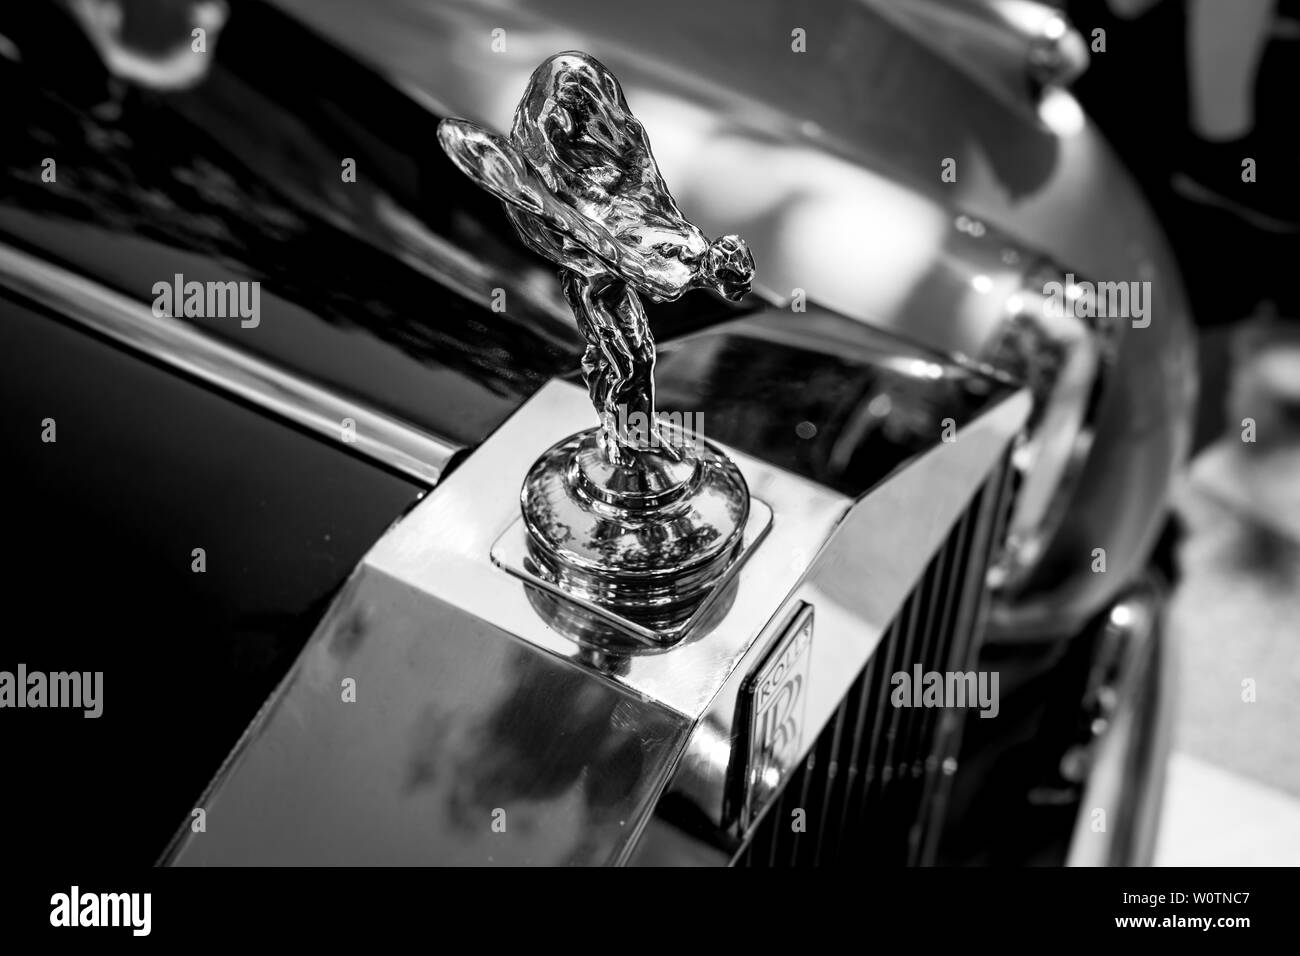 BERLIN - JUNE 09, 2018: The famous emblem 'Spirit of Ecstasy' on the Rolls-Royce luxury car. Black and white. Classic Days Berlin 2018. Stock Photo